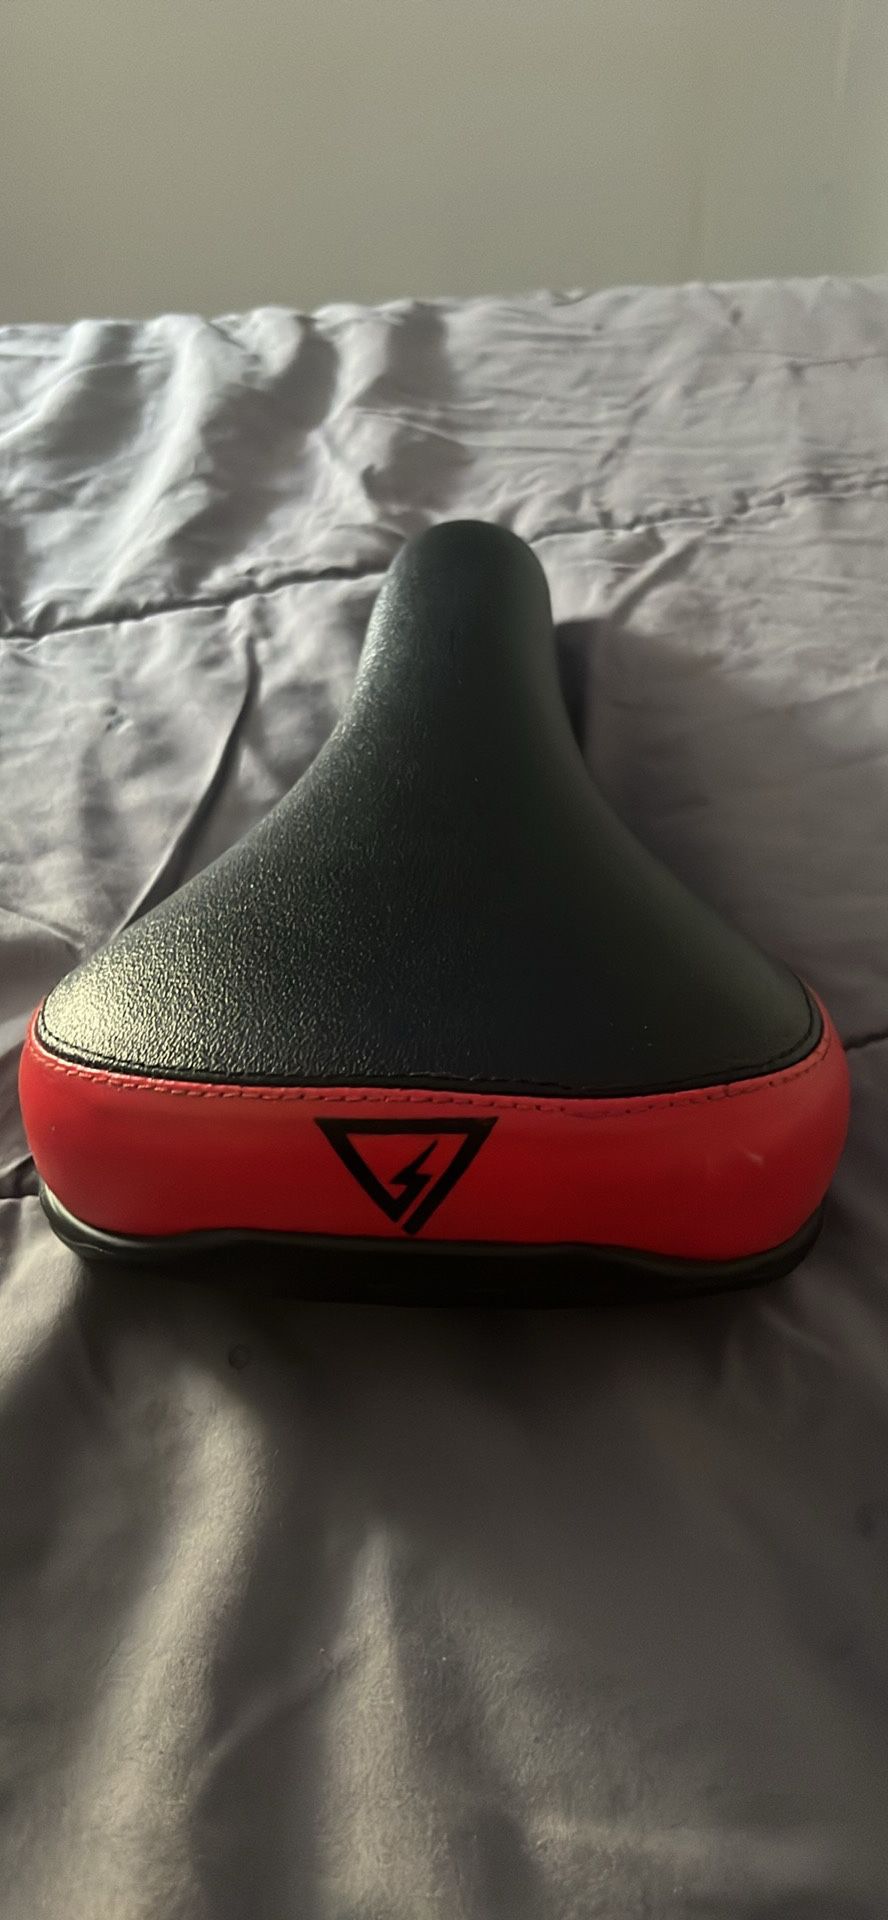 Retro Black Ops Seat Red And Black